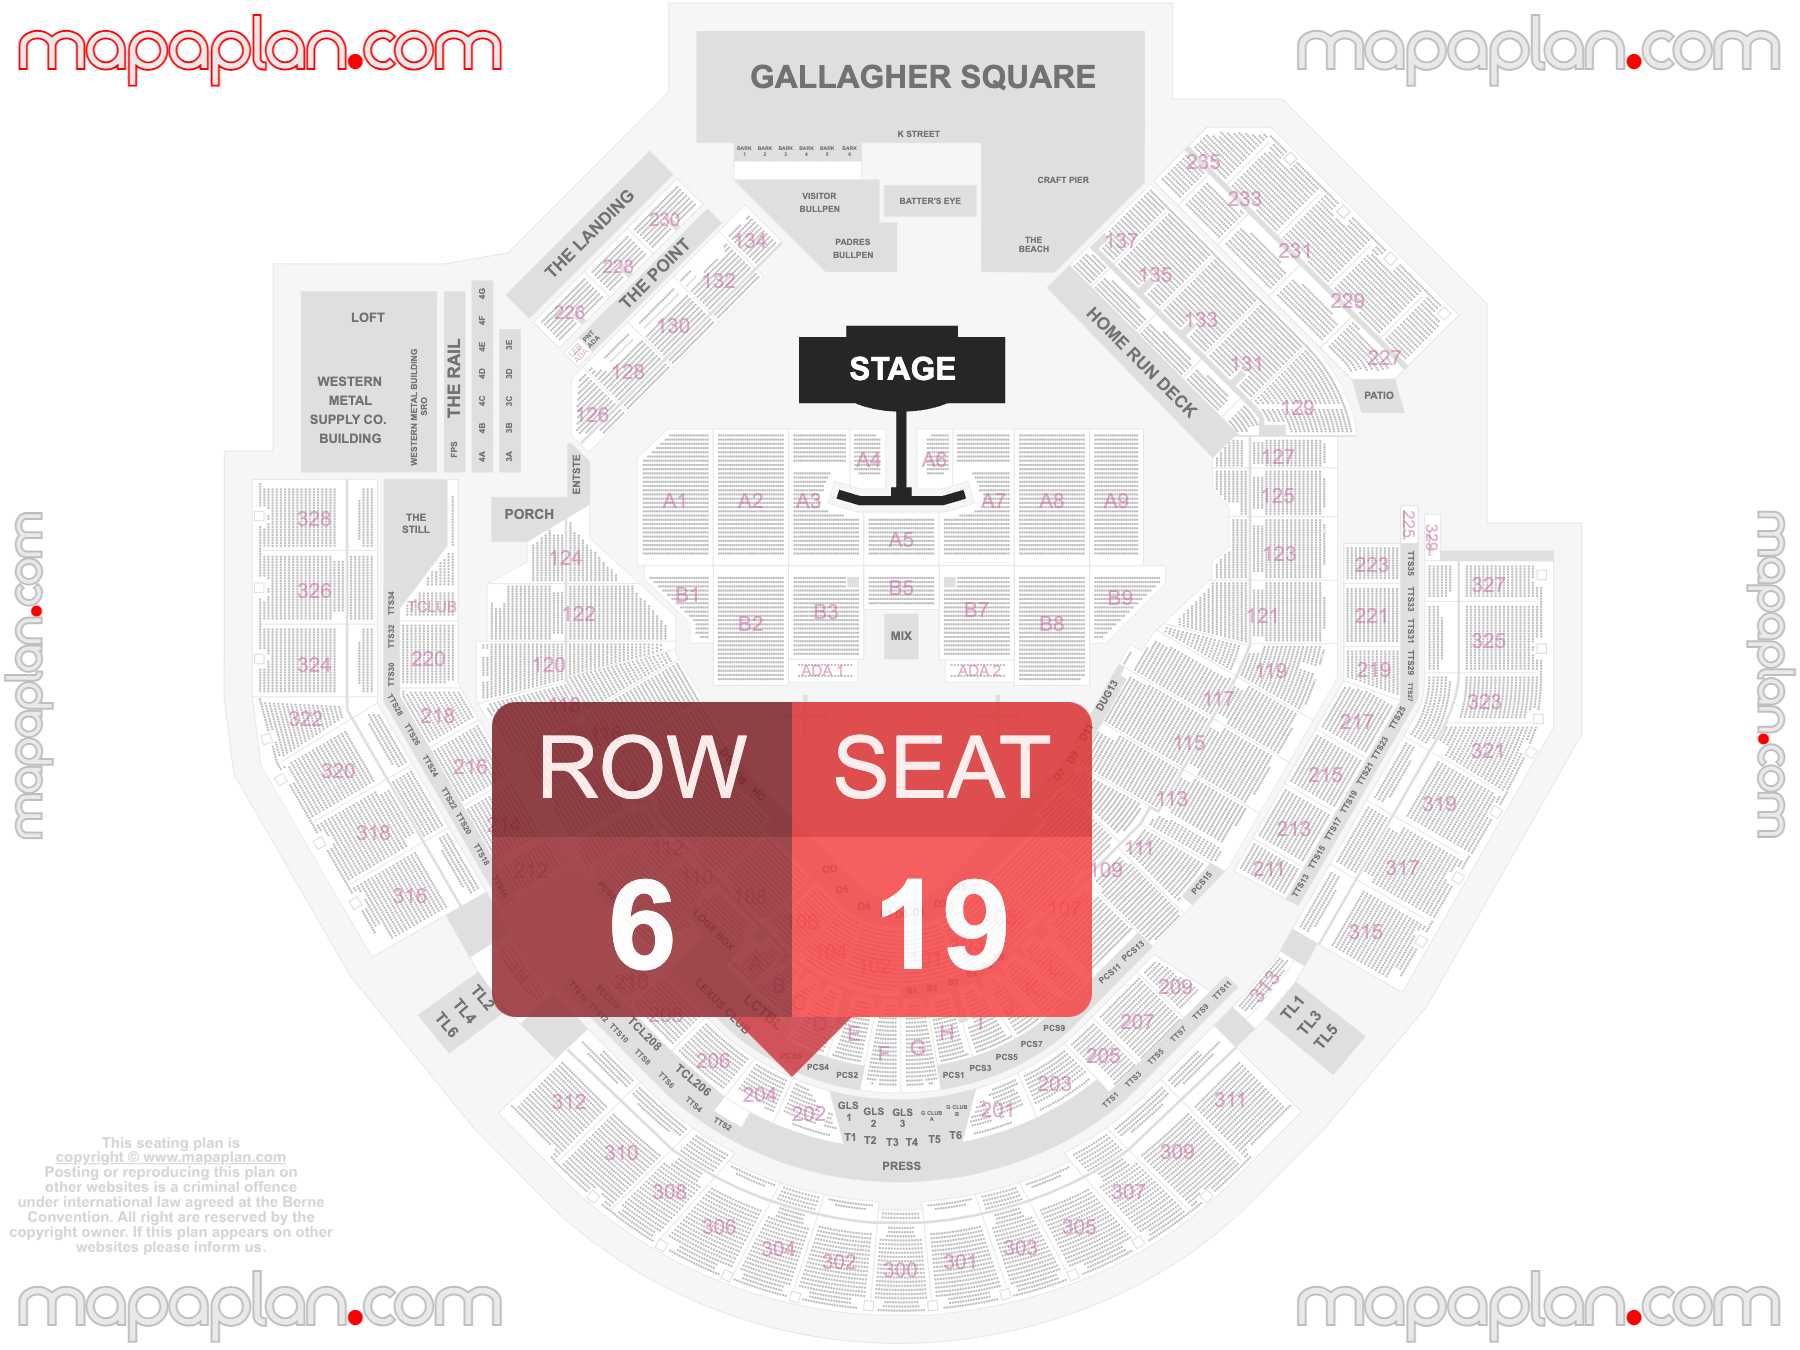 San Diego Petco Park seating chart Concert with extended catwalk runway B-stage find best seats row numbering system plan showing how many seats per row - Individual find my seat virtual locator